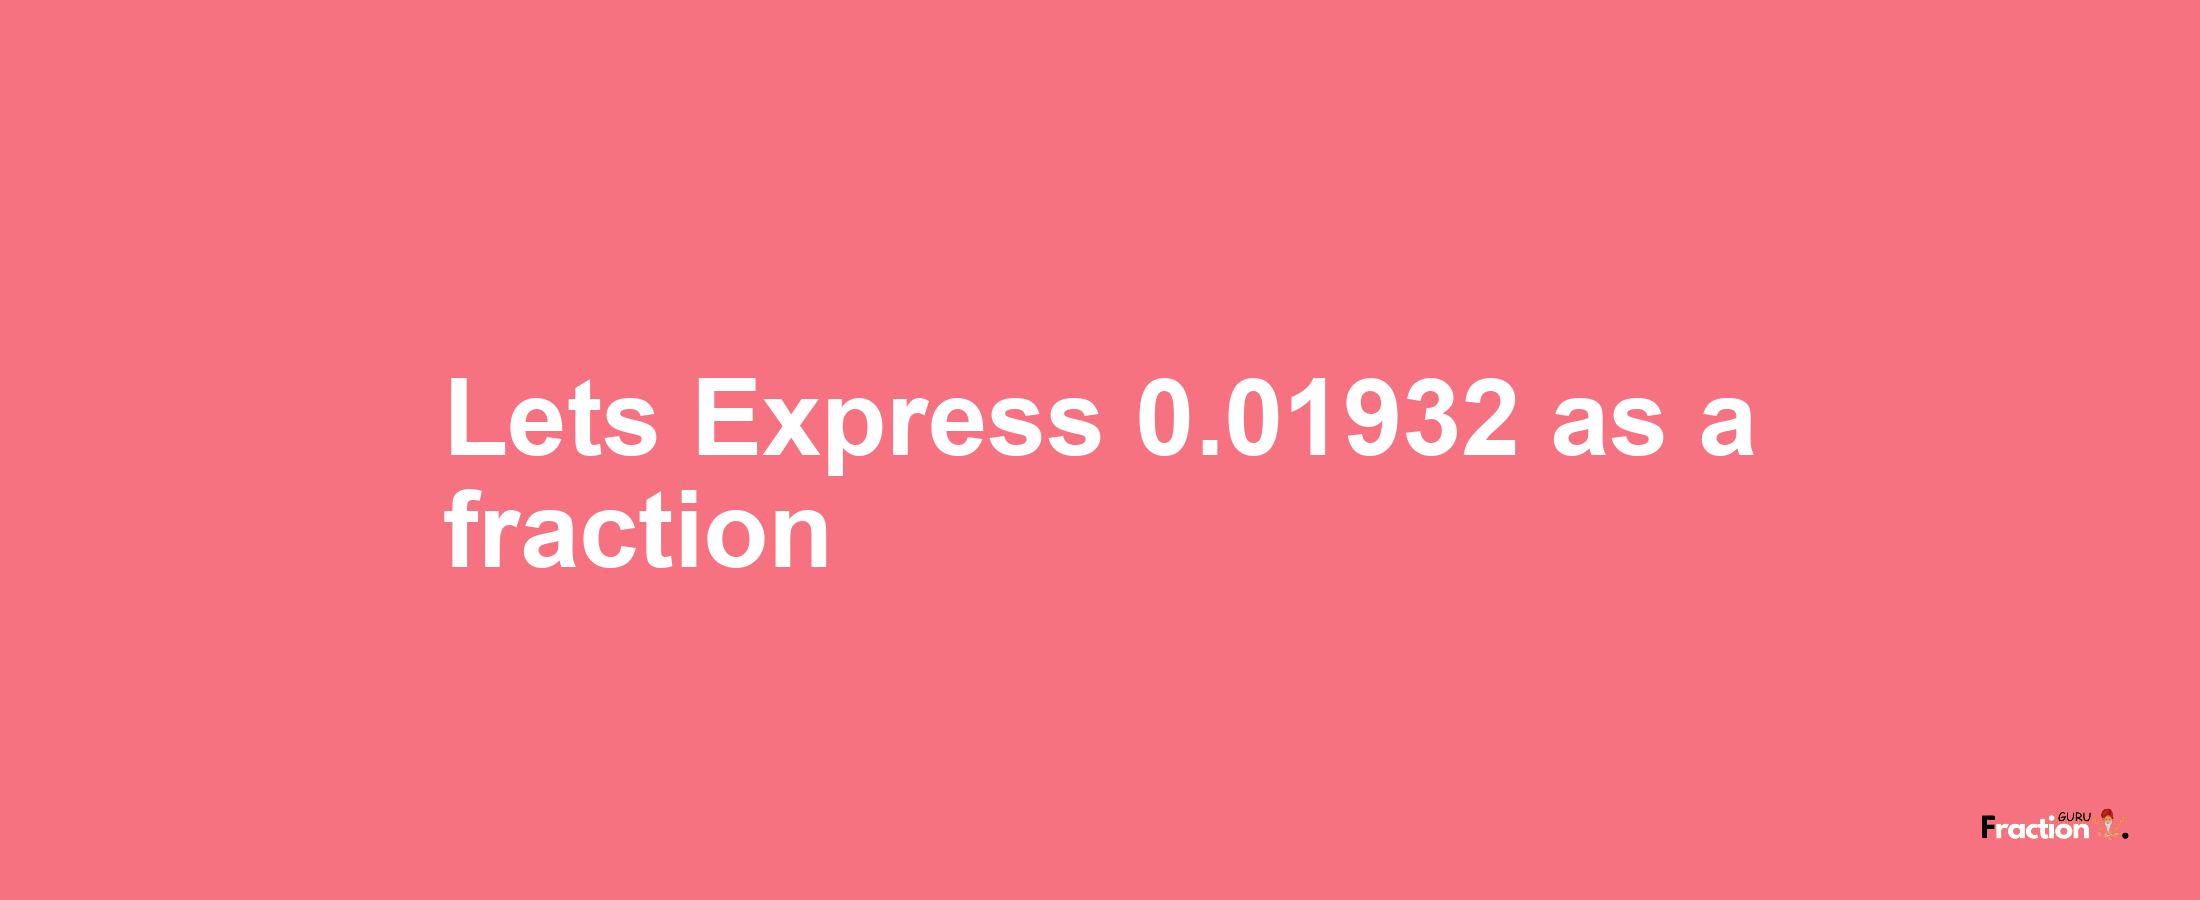 Lets Express 0.01932 as afraction